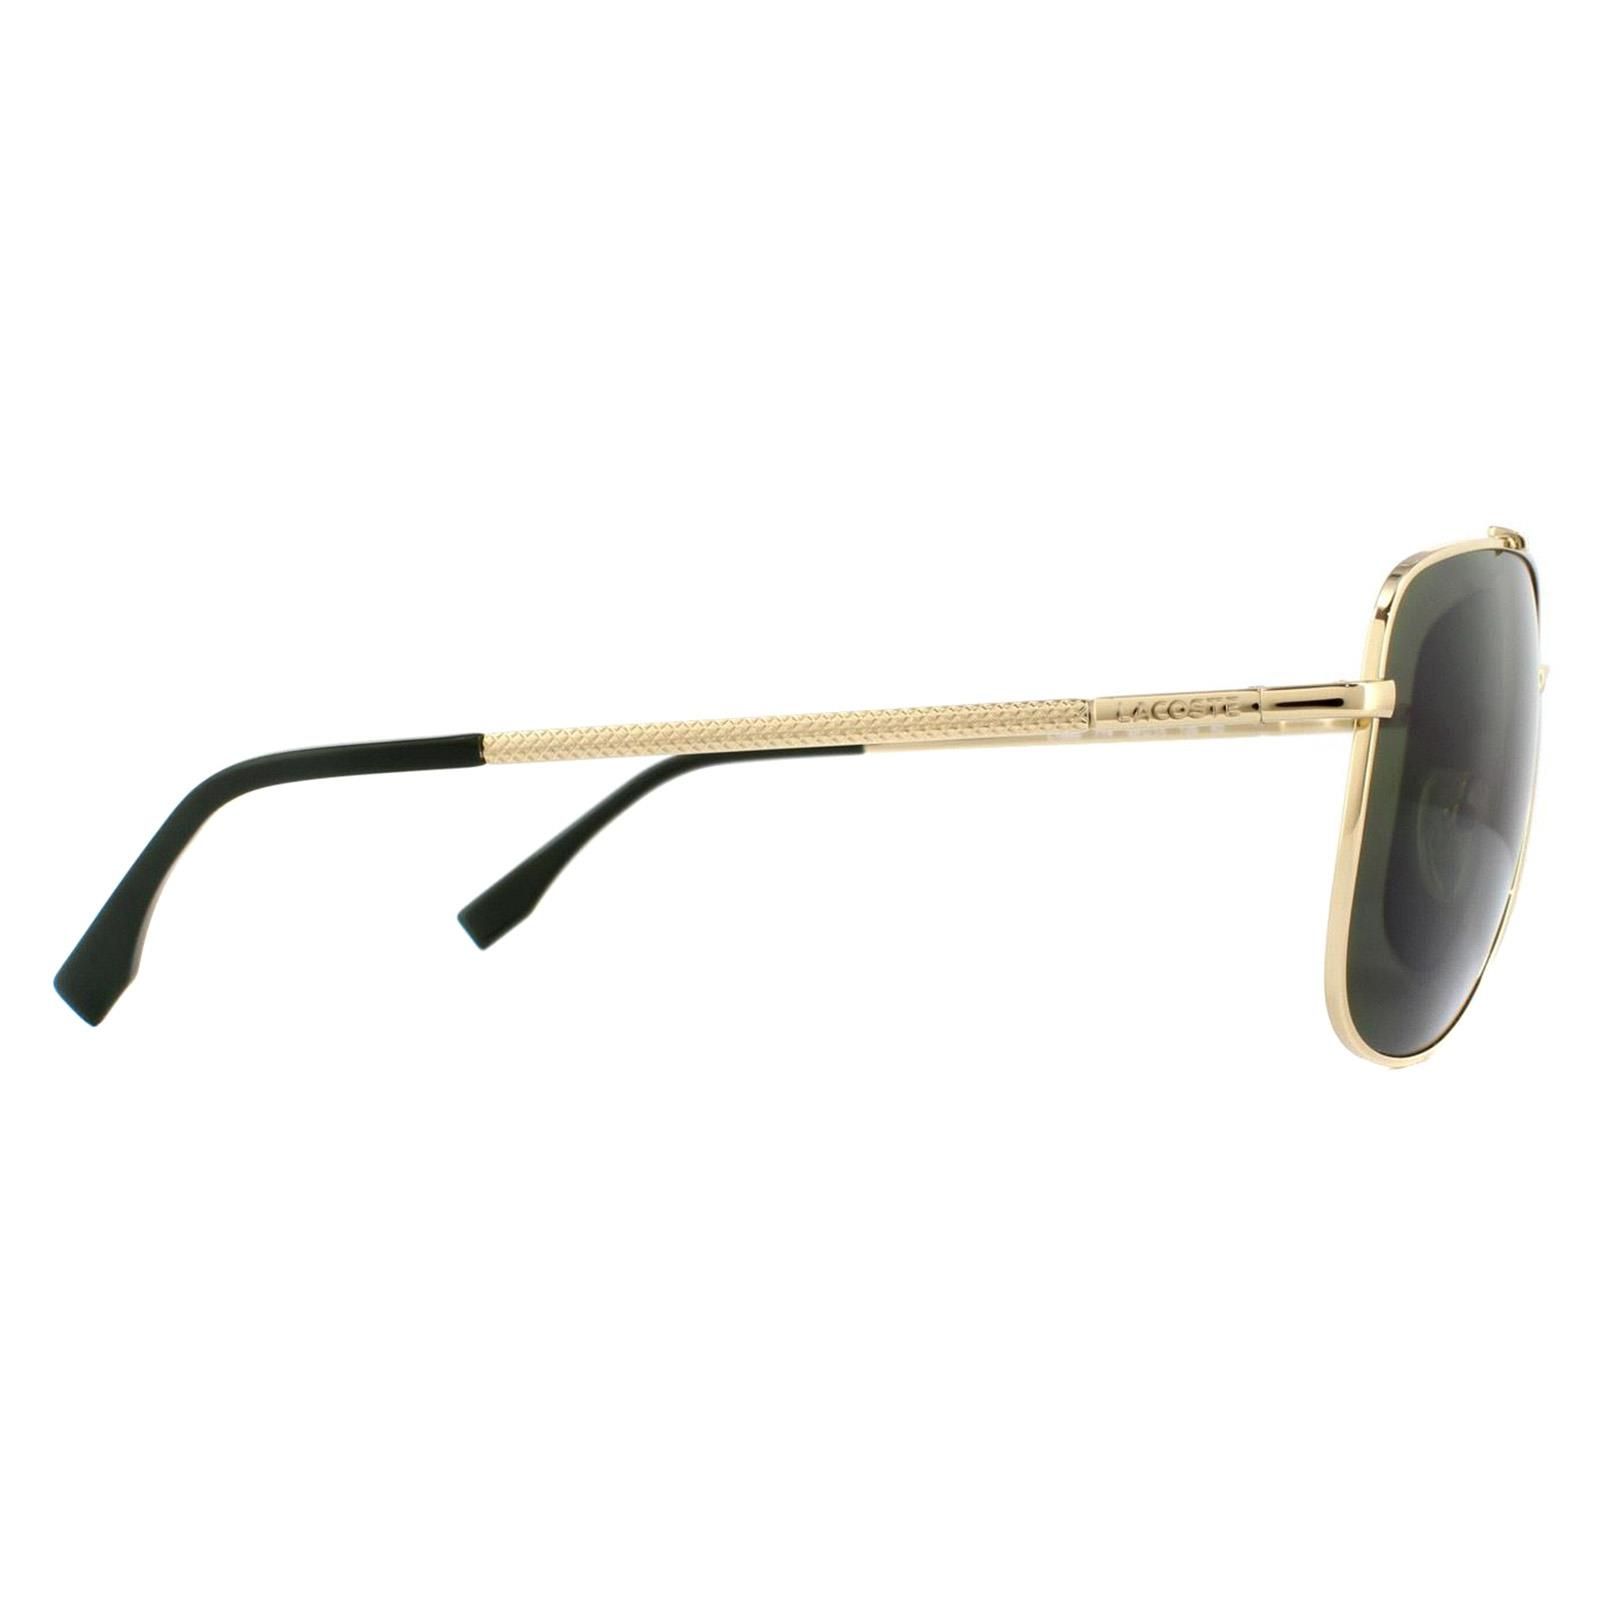 Lacoste Sunglasses L188S 035 Light Gunmetal Grey feature a textured prominent top brow bar and matching temples with the Lacoste lettered logo for a classic modern look.